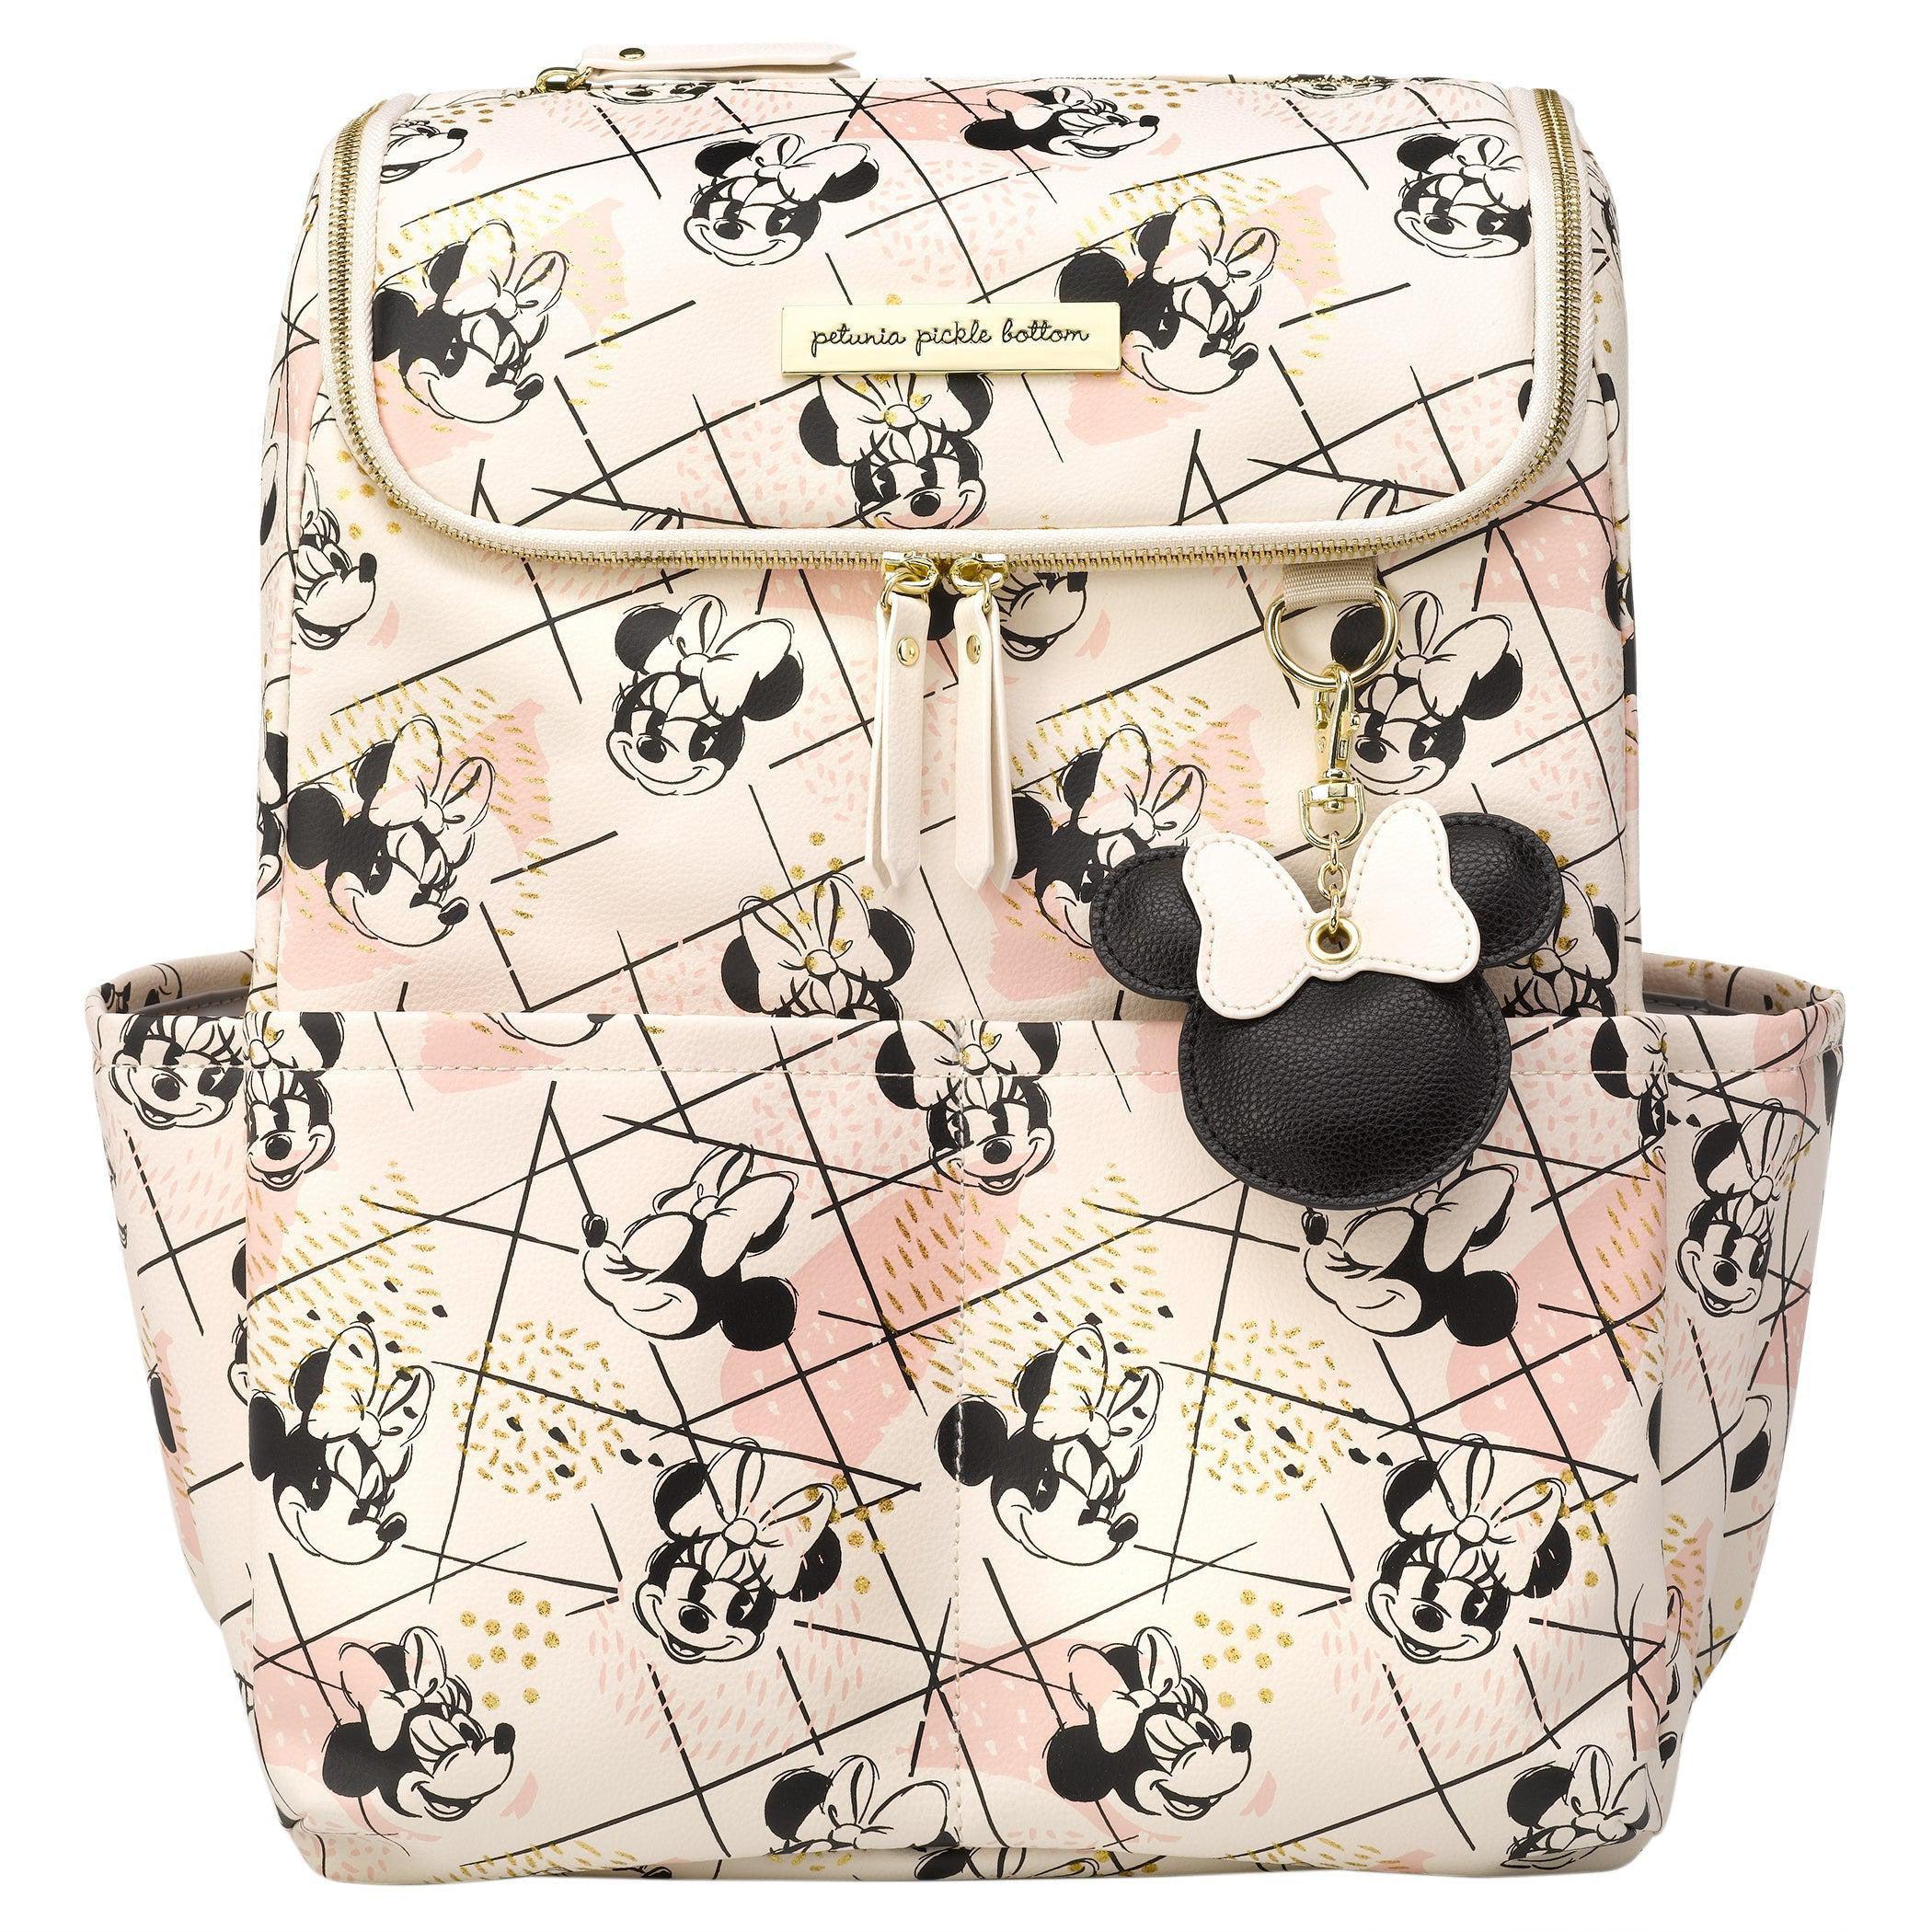 Petunia Pickle Bottom Method Diaper Backpack in Shimmery Minnie Mouse